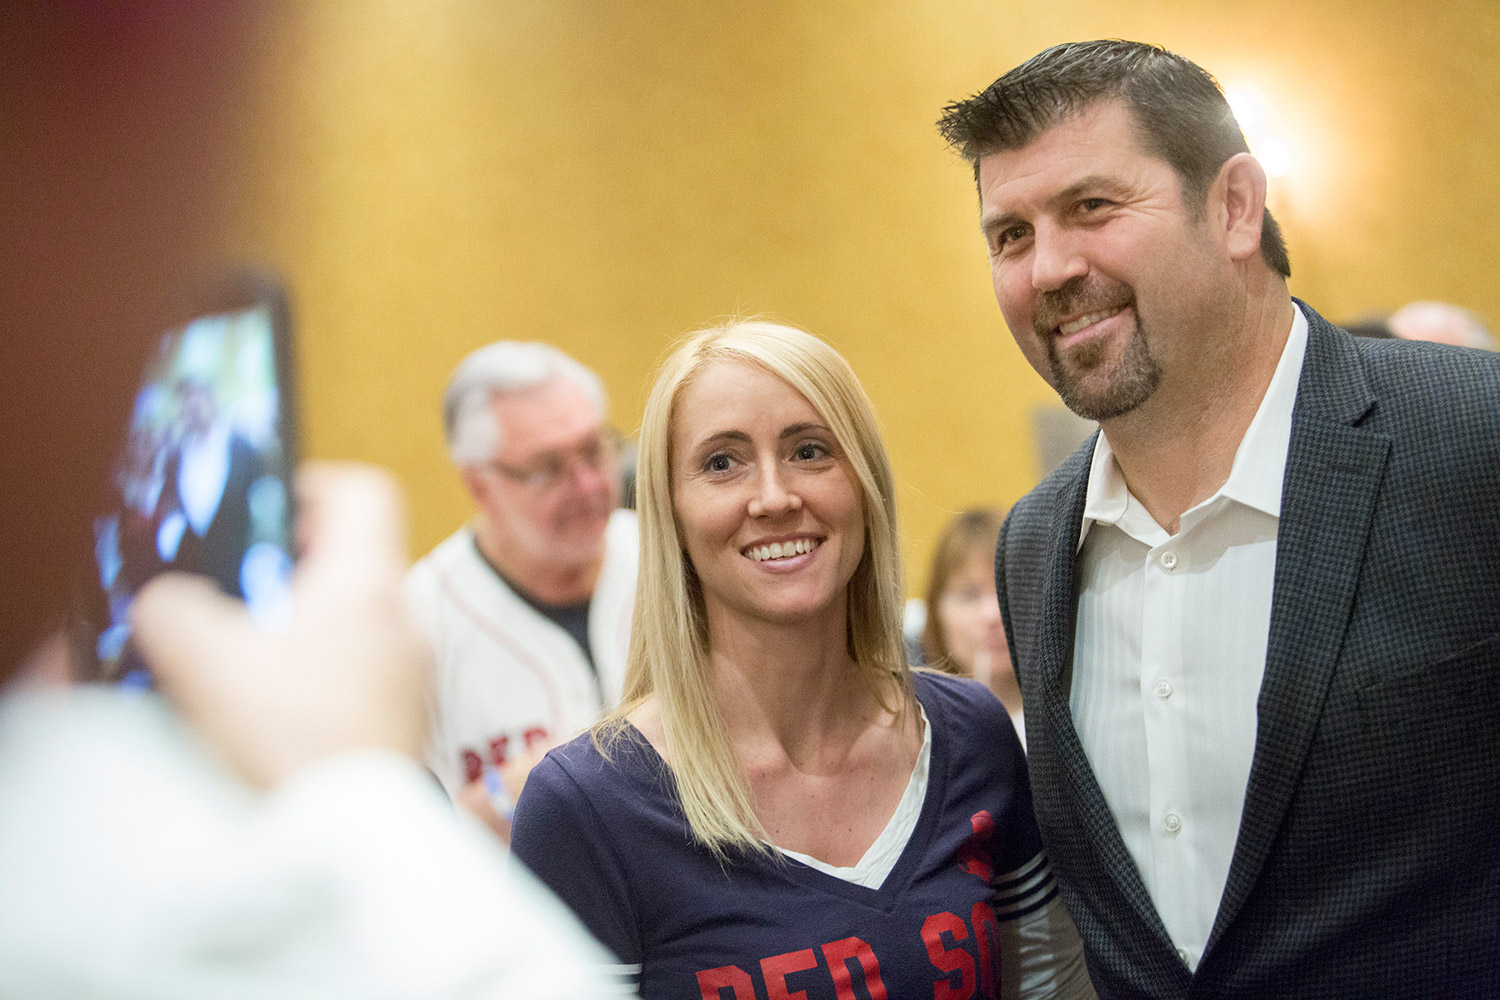 With Jason Varitek in town, Sea Dogs' Hot Stove Dinner stokes Red Sox fever